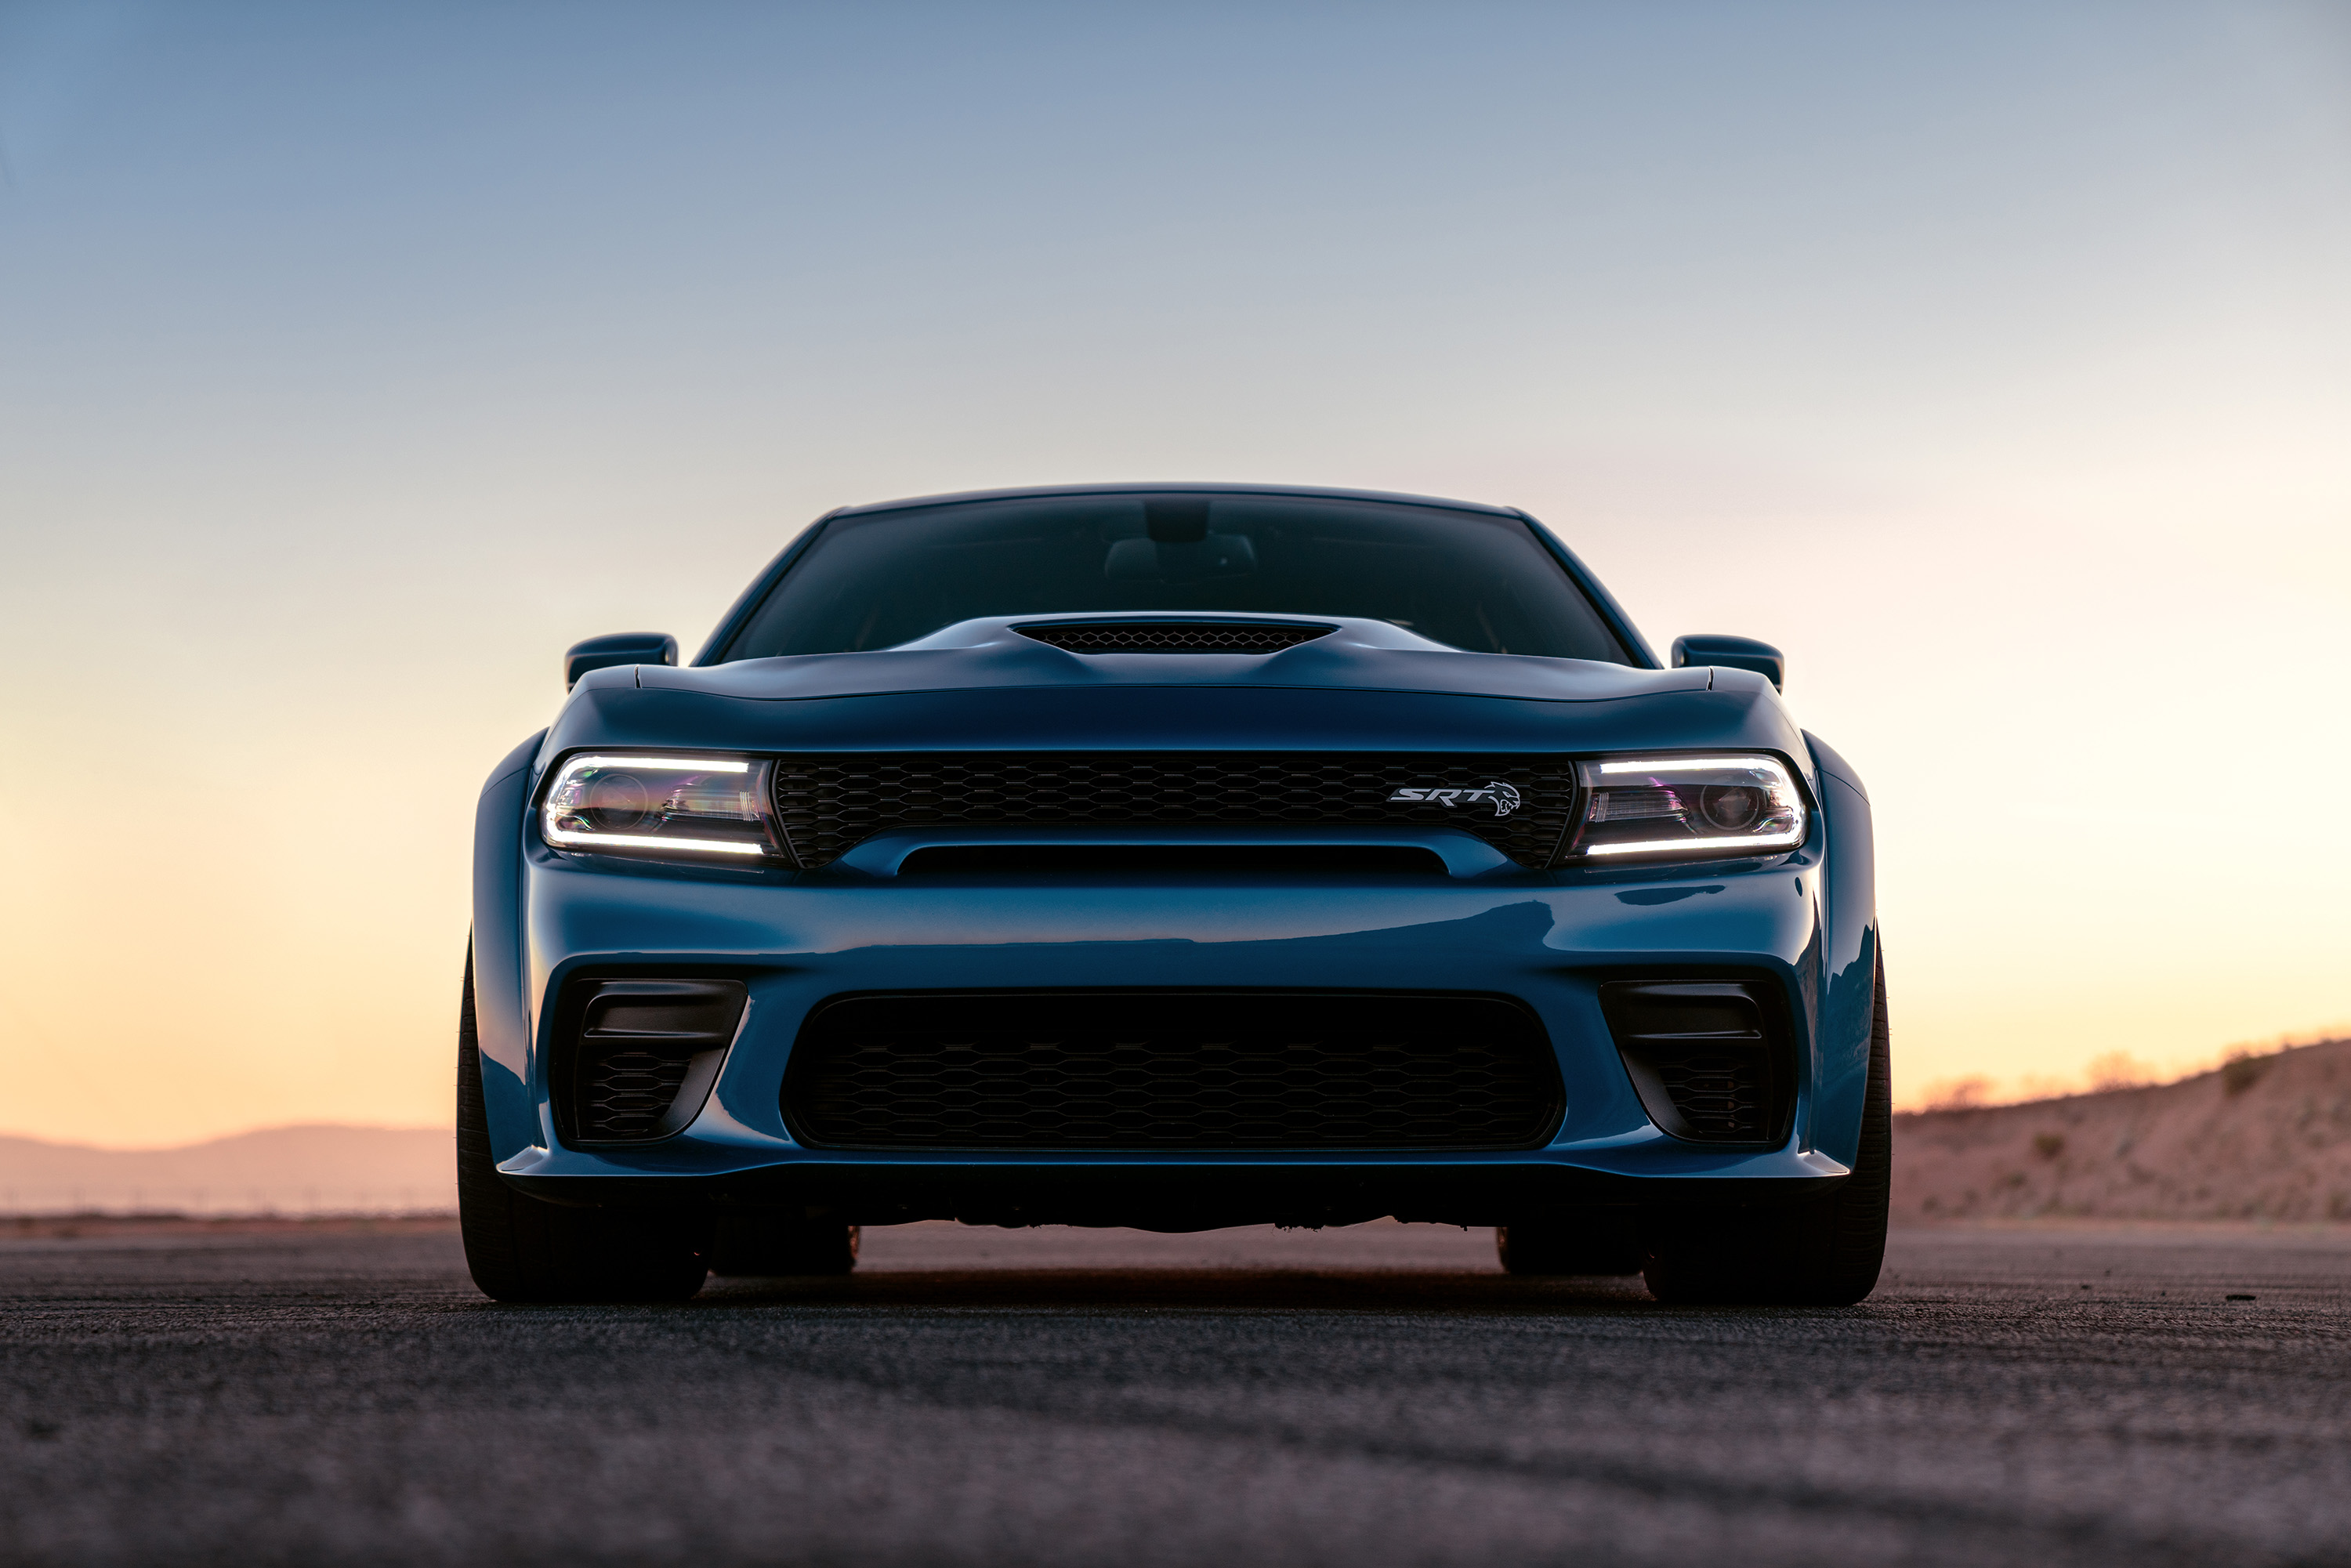 2020 Dodge Charger SRT Hellcat Widebody 4k, HD Cars, 4k Wallpapers